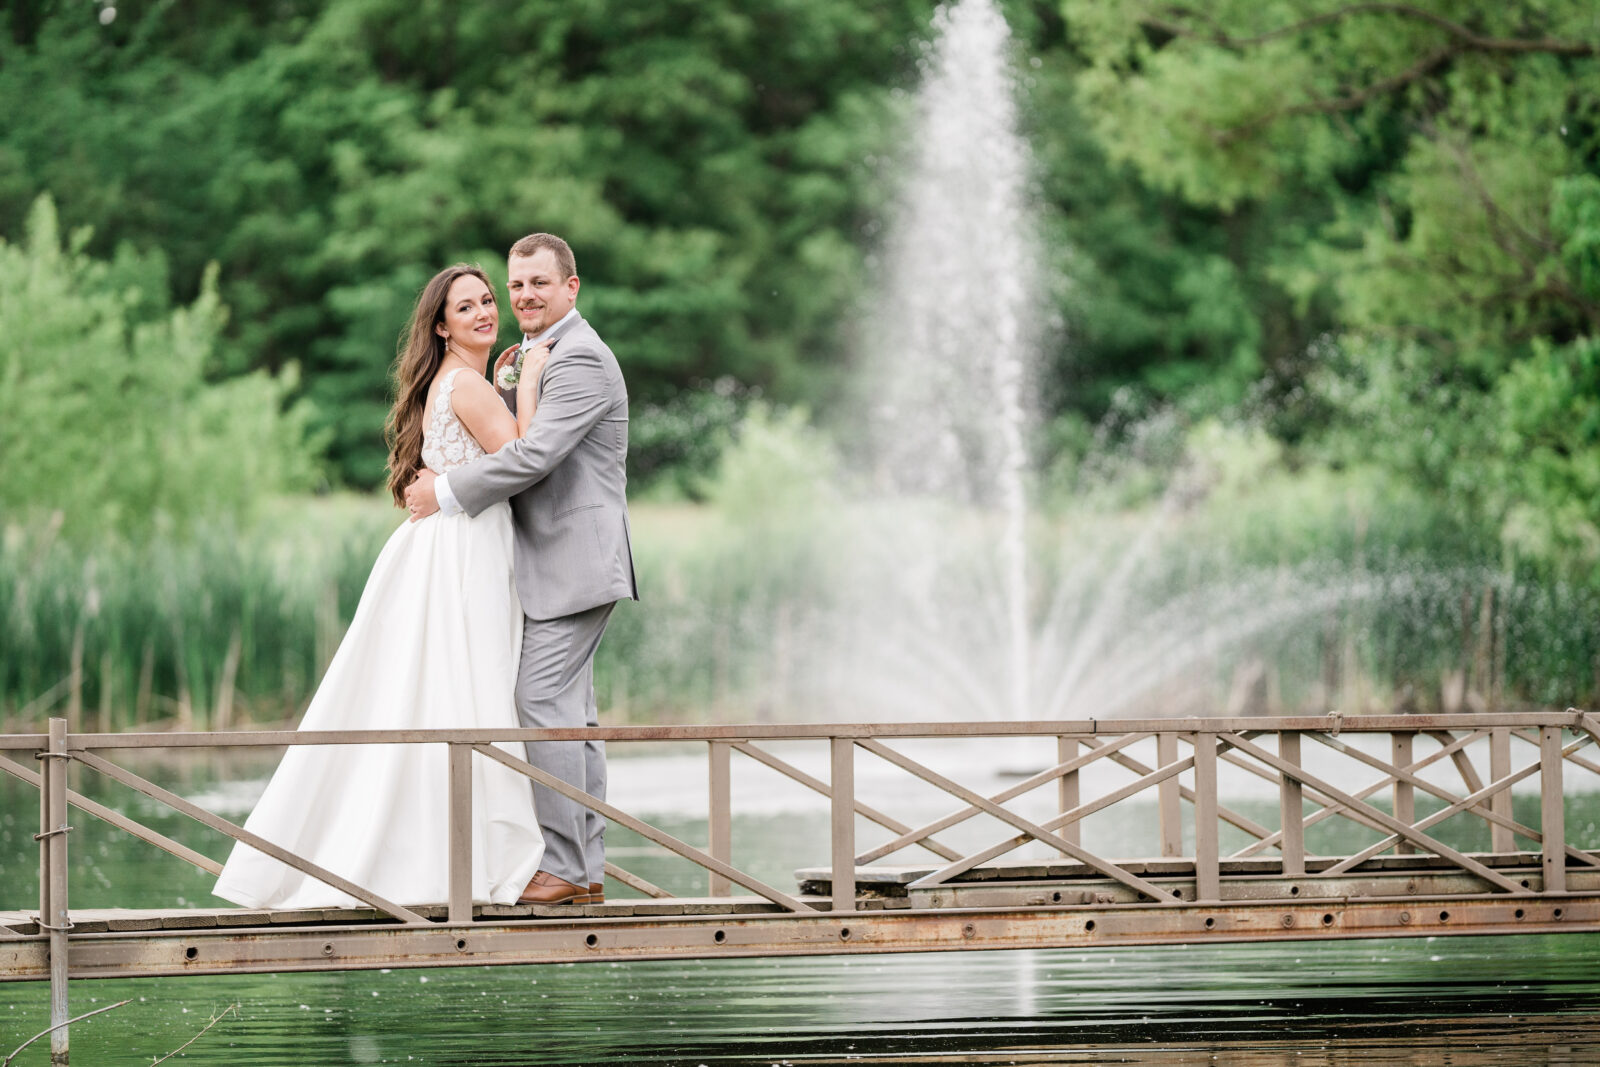 bride and groom embracing on a bridge together with a water feature behind them 